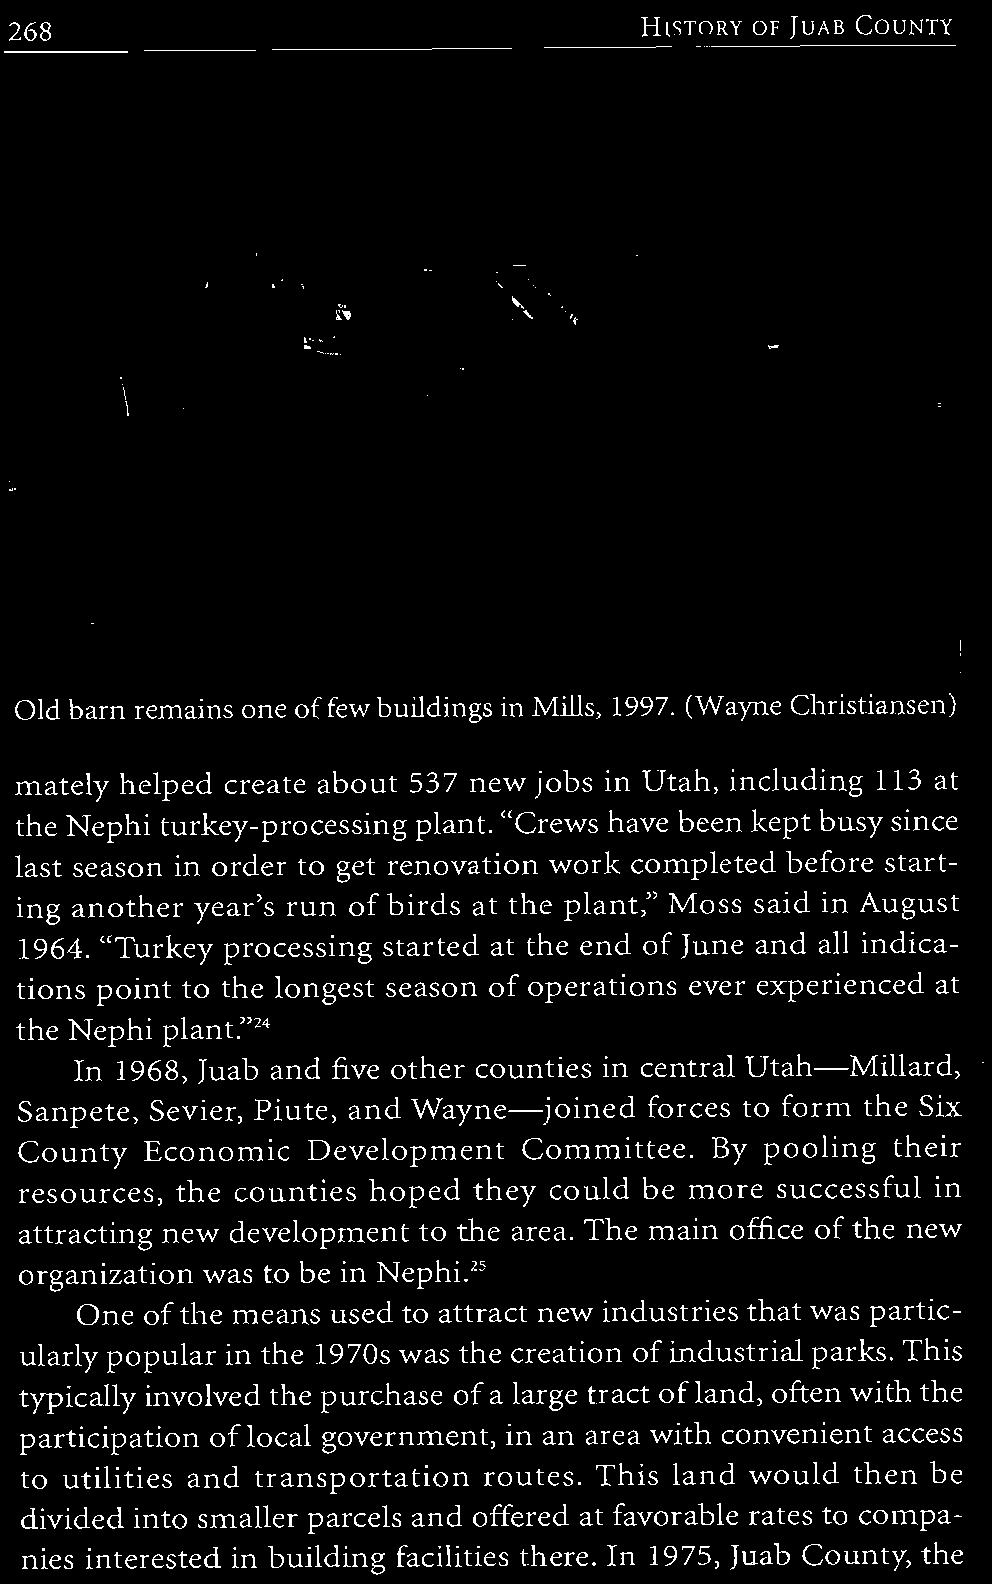 " 24 In 1968, Iuab and five other counties in central Utah Millard, Sanpete, Sevier, Piute, and Wayne joined forces to form the Six County Economic Development Committee.